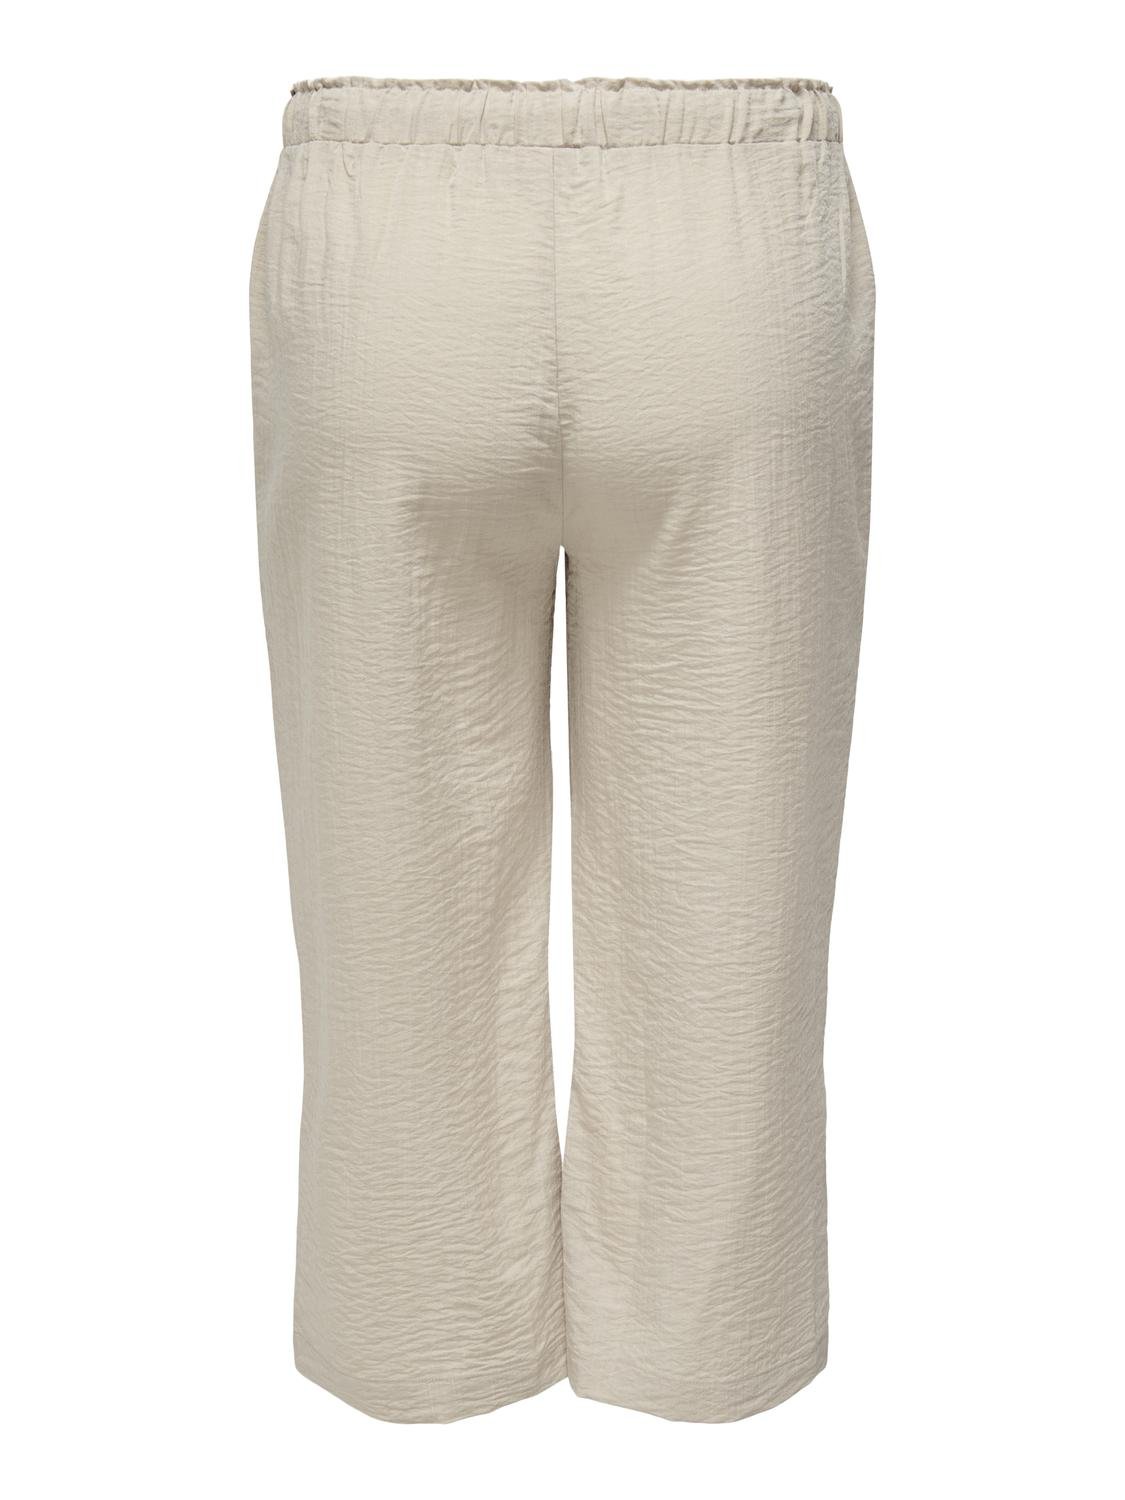 ONLY Regular Fit Trousers -Pumice Stone - 15312294